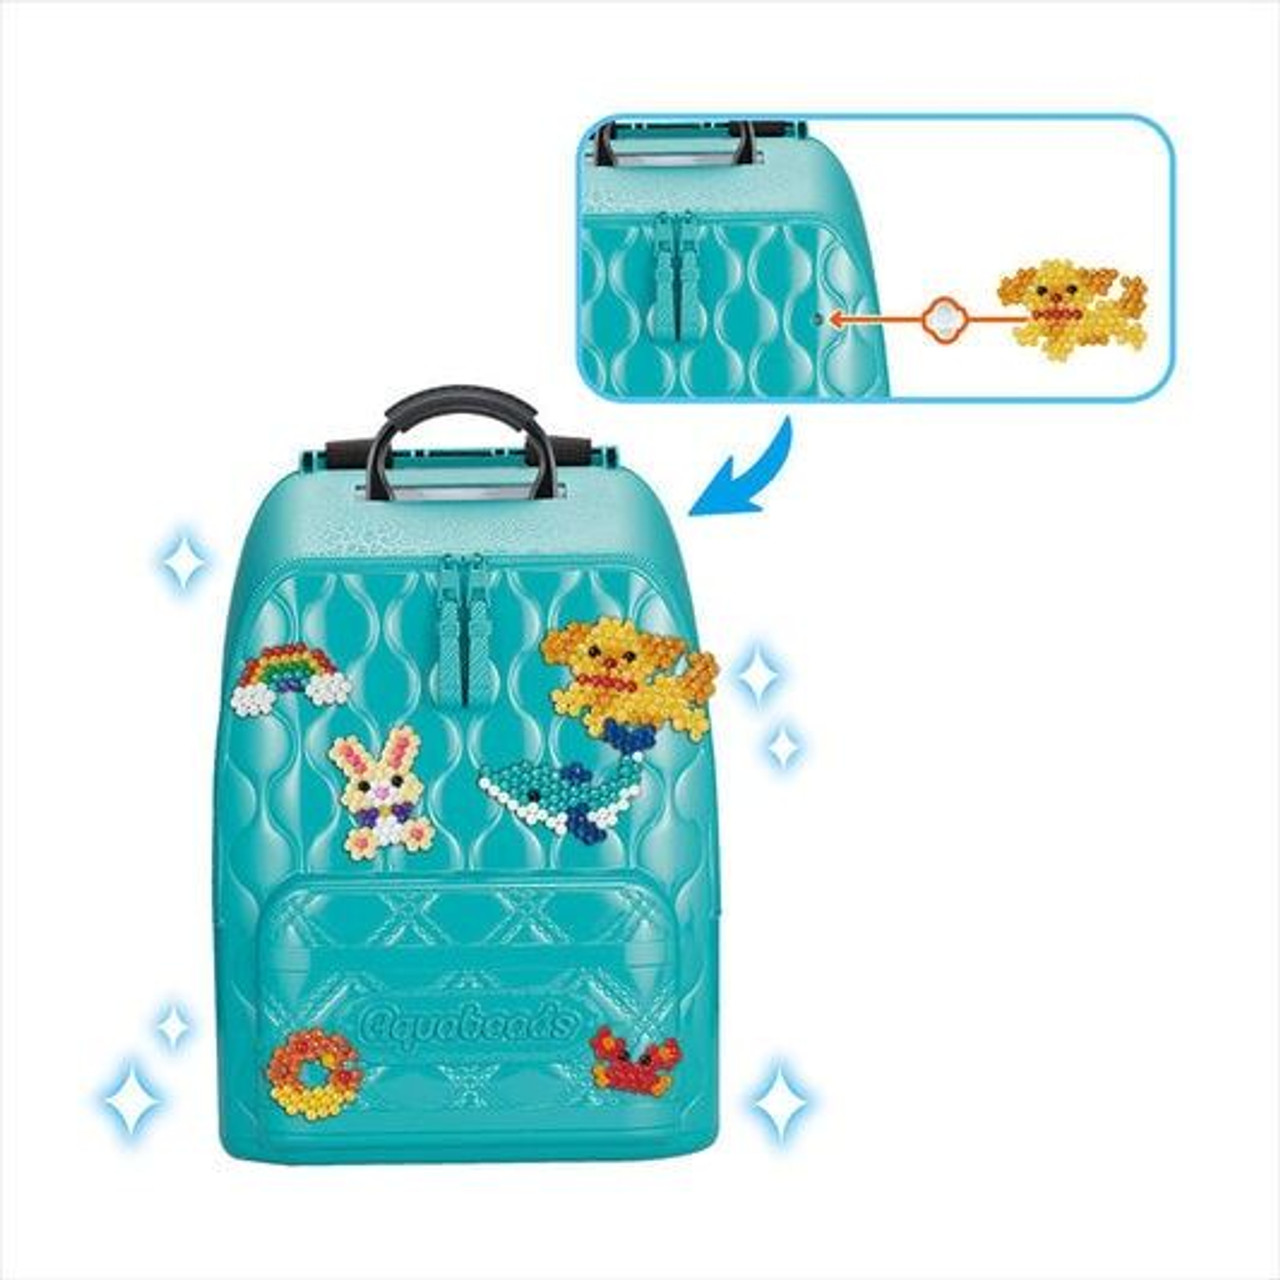 Aquabeads Deluxe Craft Backpack 2